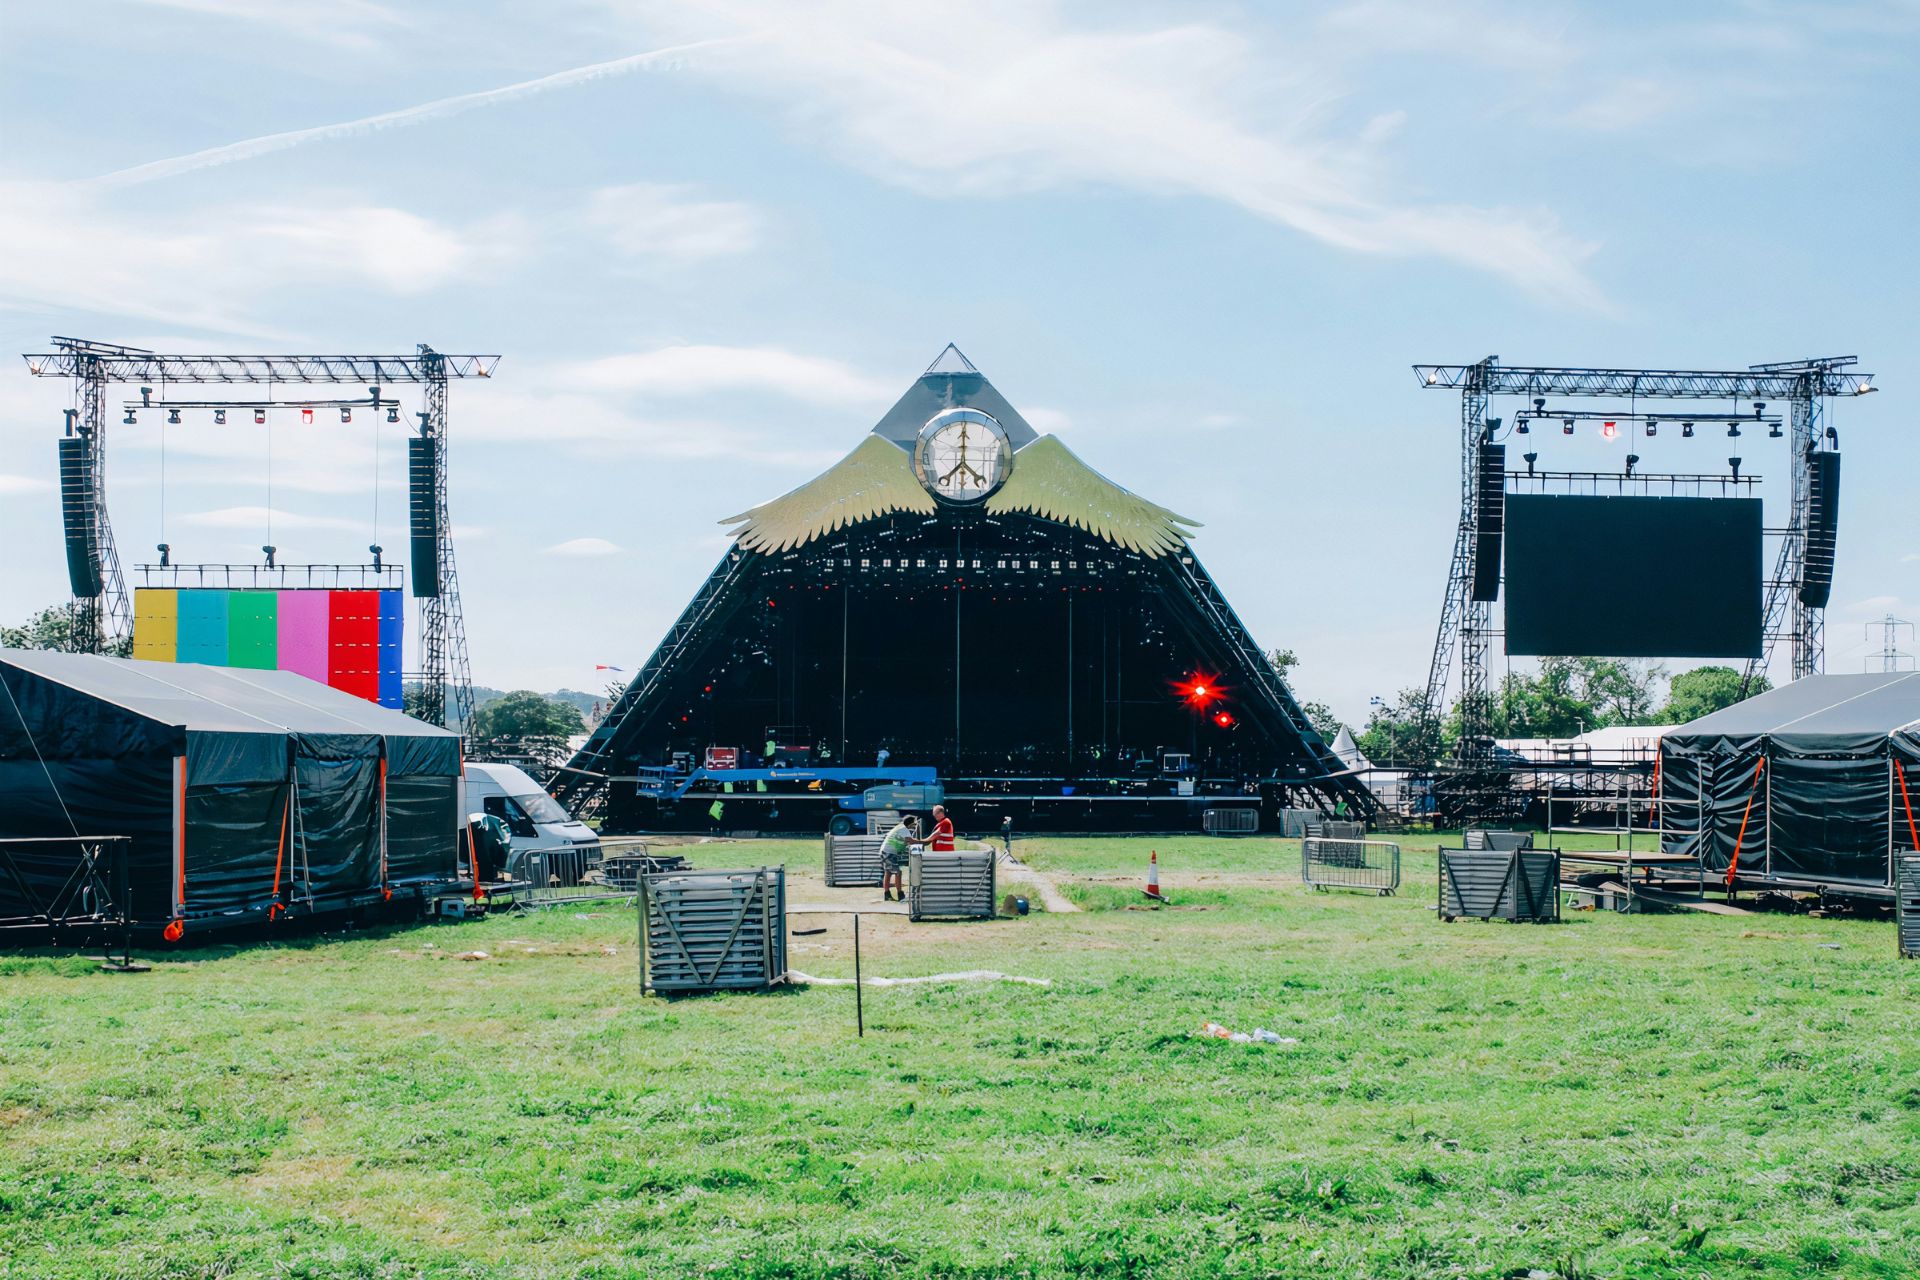 Secret Sets At Glastonbury: Everything You Need To Know